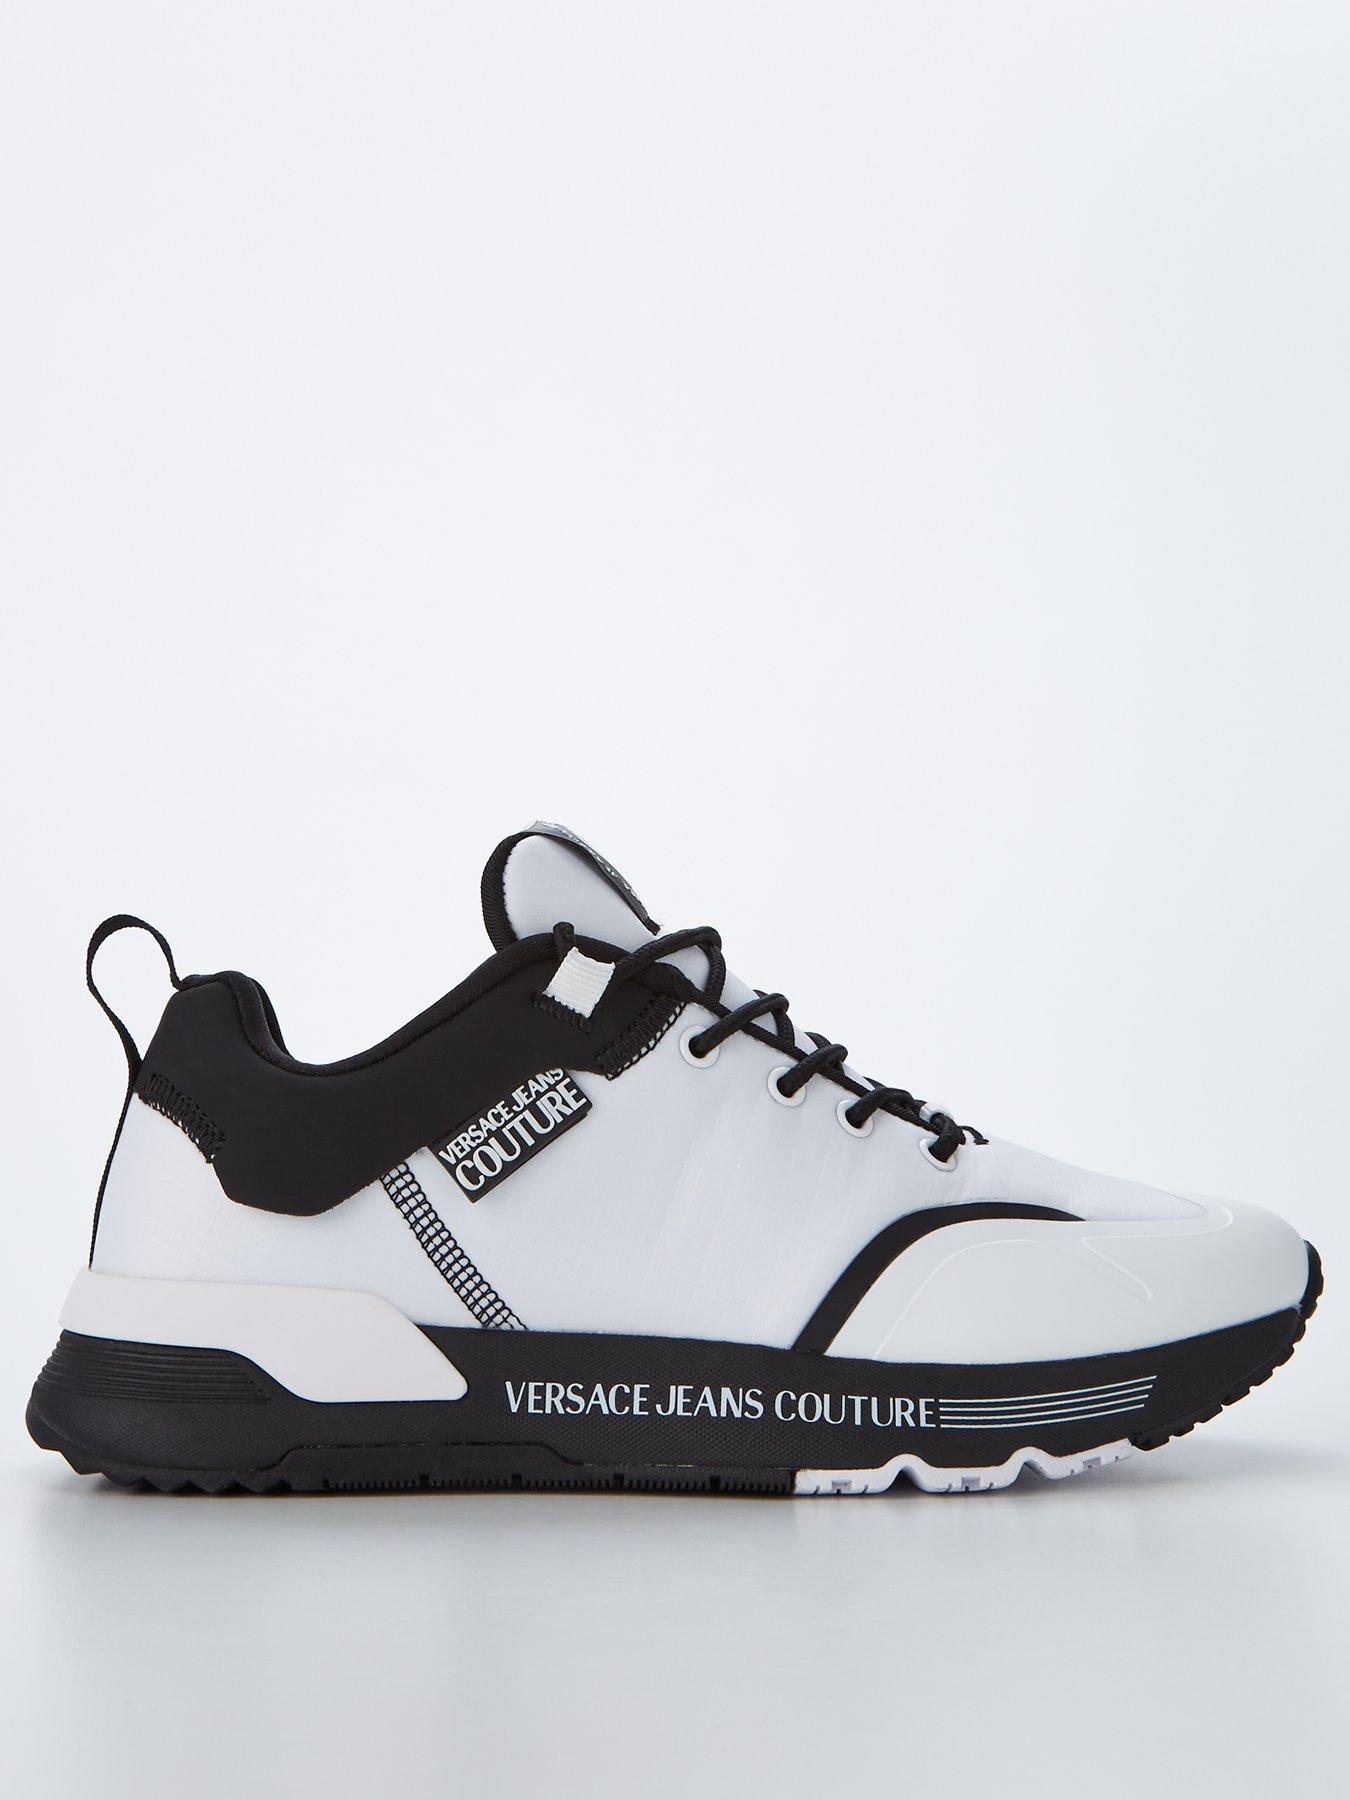 Versace Jeans Couture Men's Dynamic Runner Trainers - White | very.co.uk